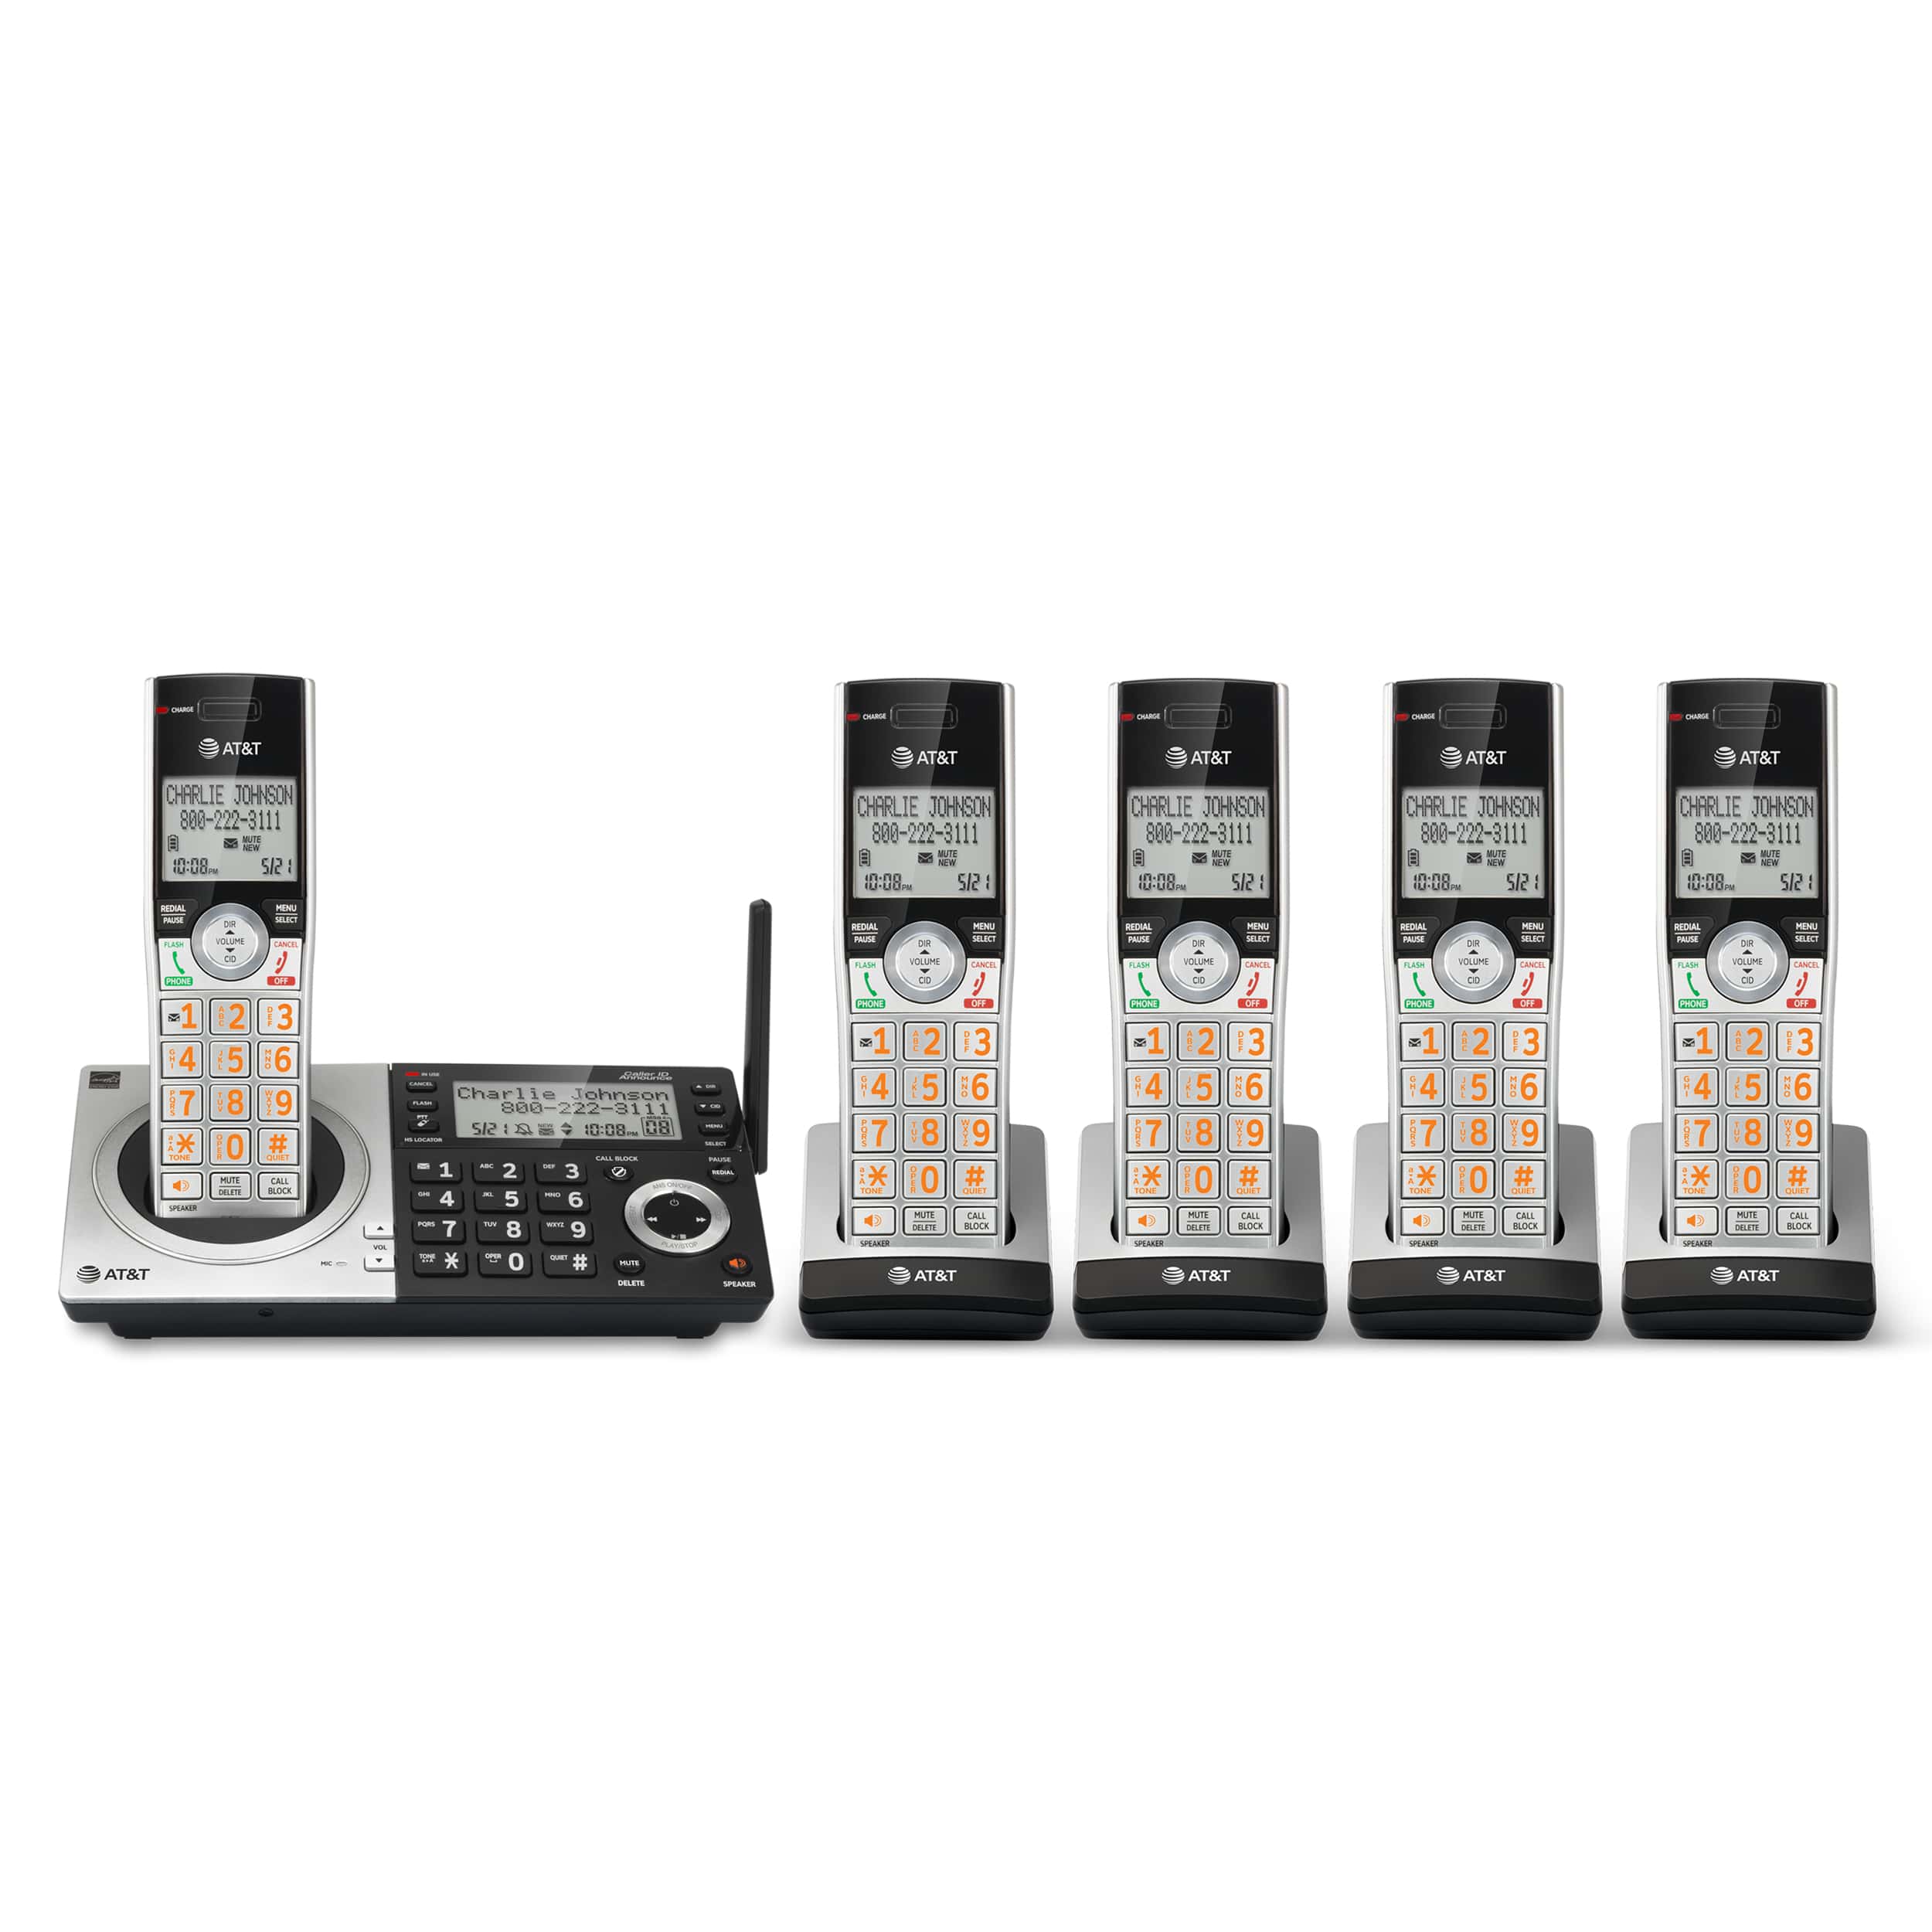 5-Handset Expandable Cordless Phone with Unsurpassed Range, Smart Call Blocker and Answering System - view 1